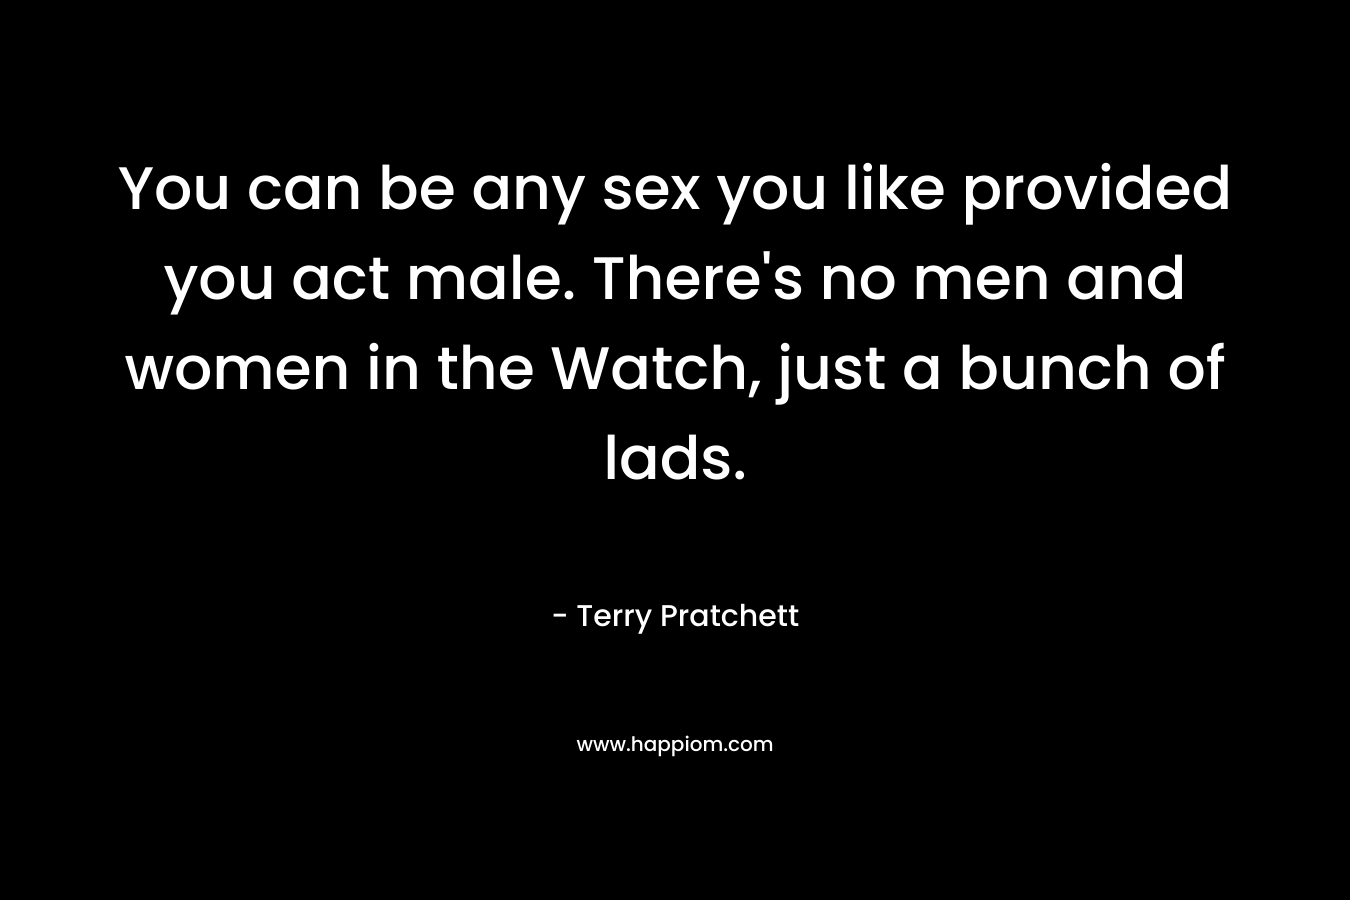 You can be any sex you like provided you act male. There’s no men and women in the Watch, just a bunch of lads. – Terry Pratchett